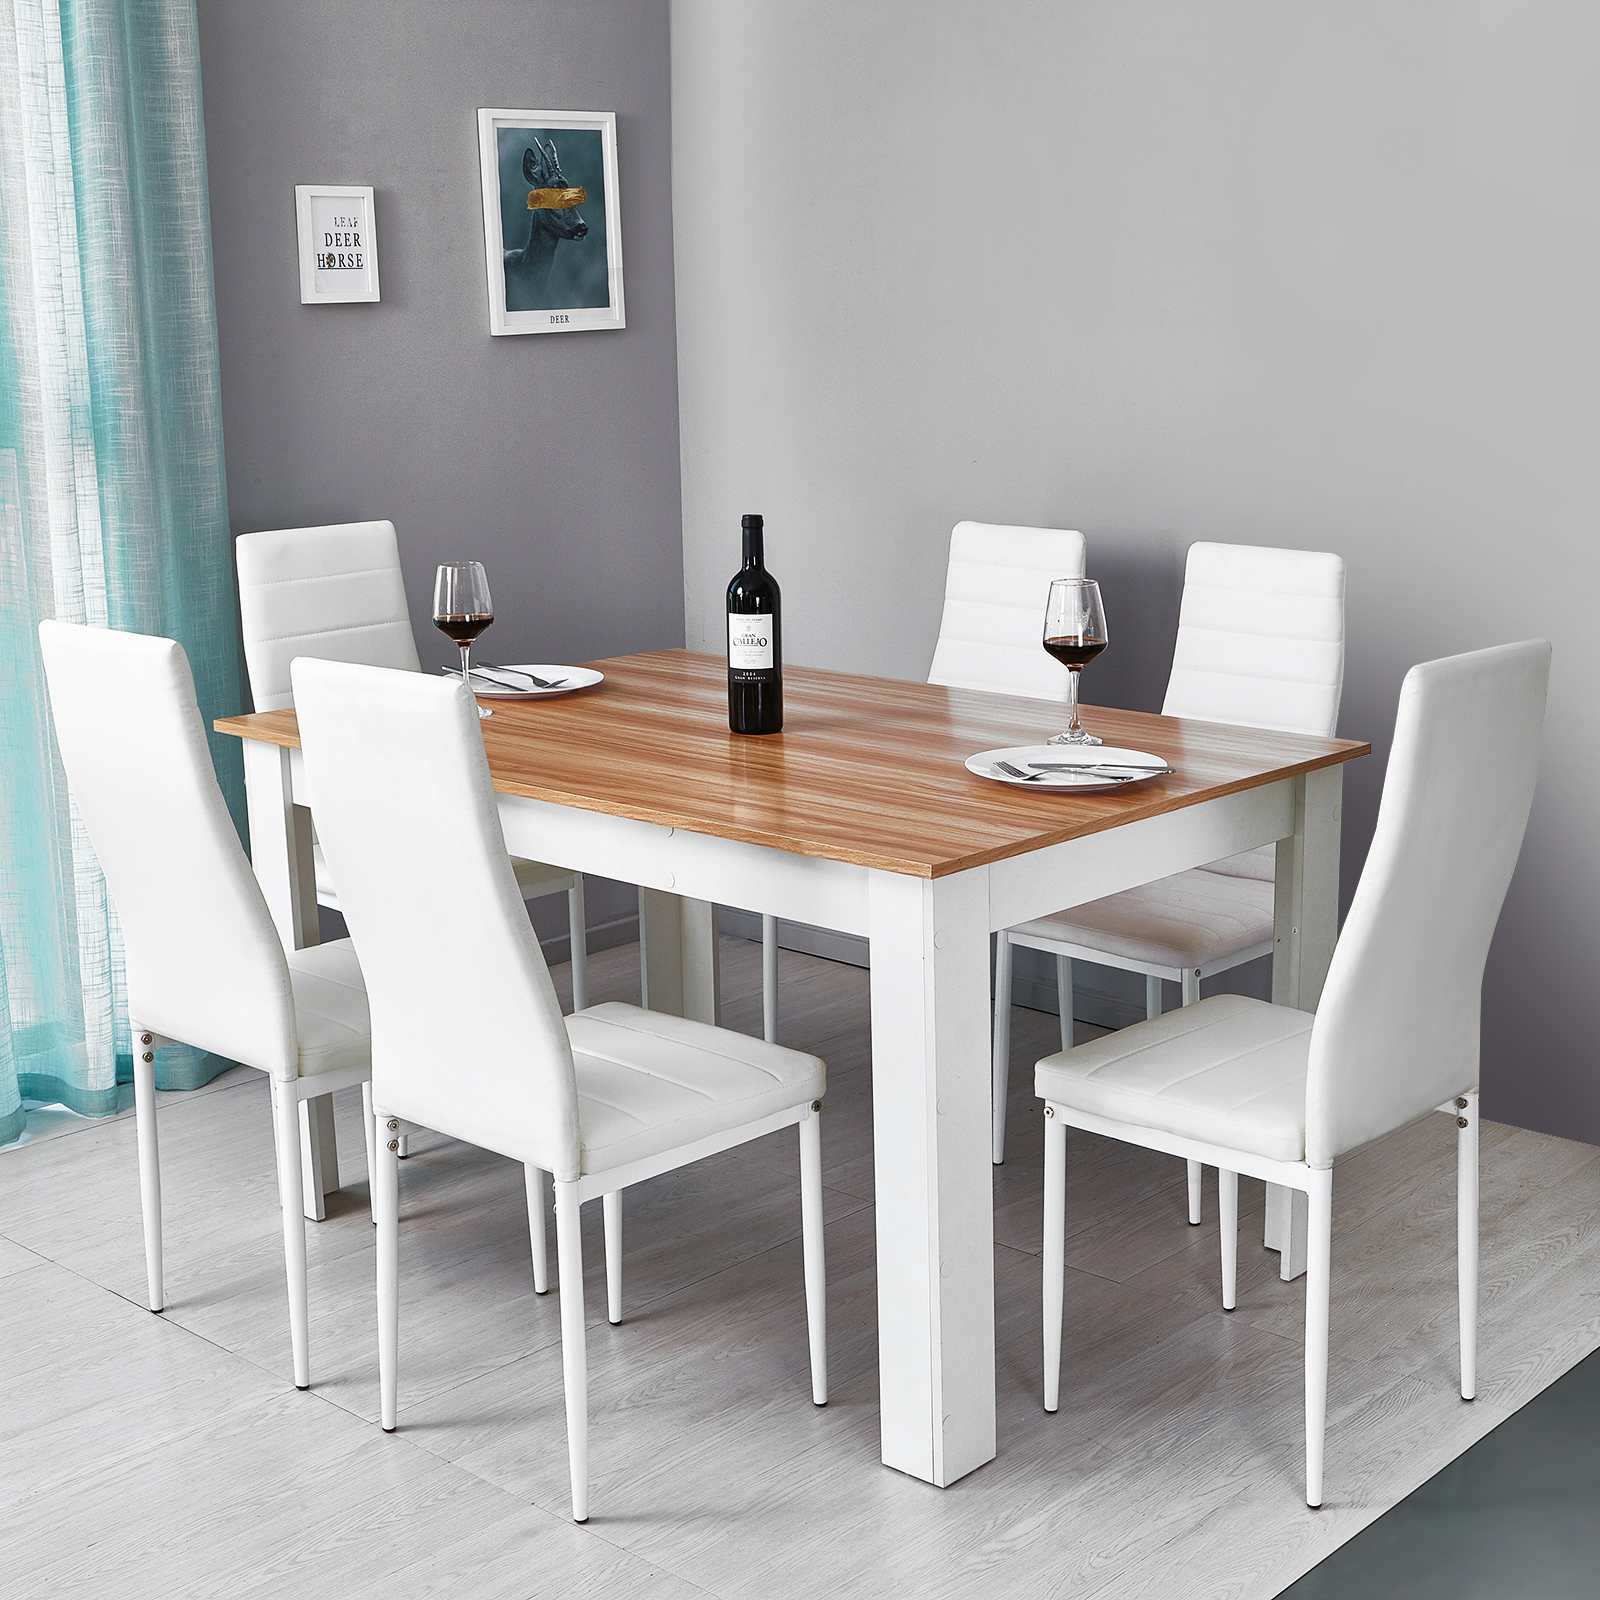 Wooden Dining Table Set W 6 Faux Leather Chairs Seat Kitchen Furniture Oakwhite 711639638617 Ebay